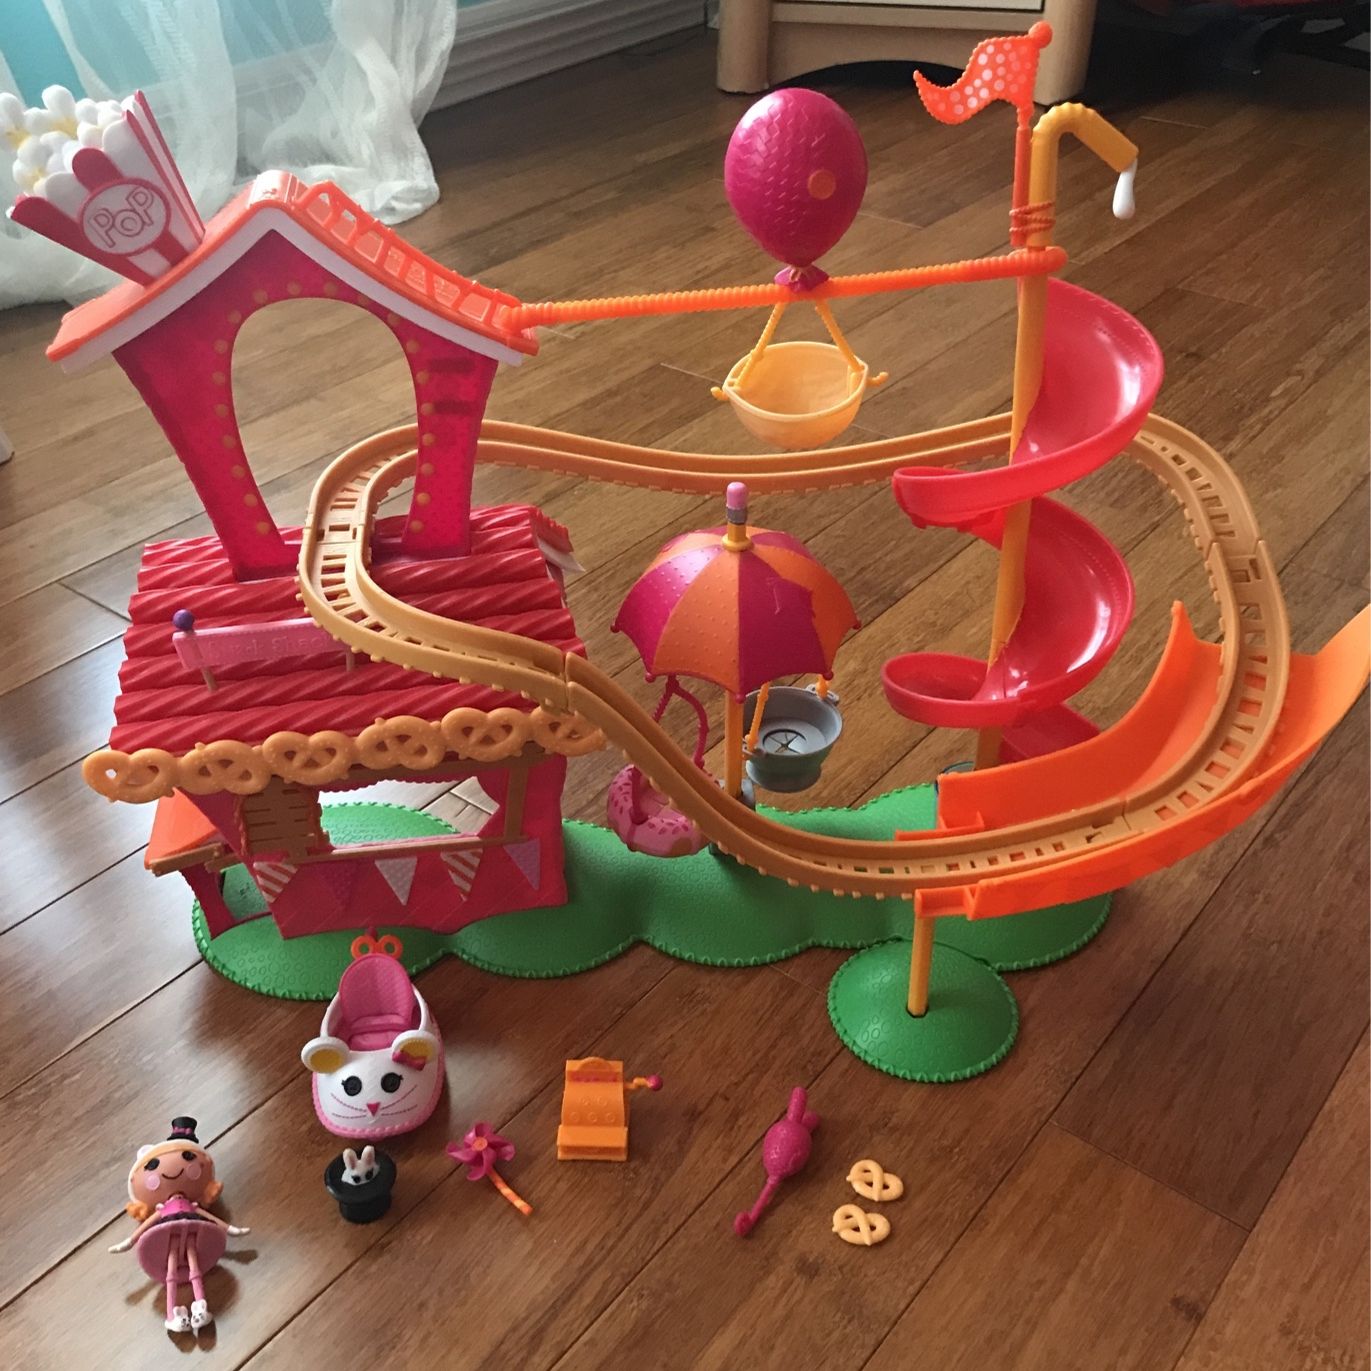 Lalaloopsy Silly Fun House Playset #dollhouse #toy #kids #lalaloopsy #play #game